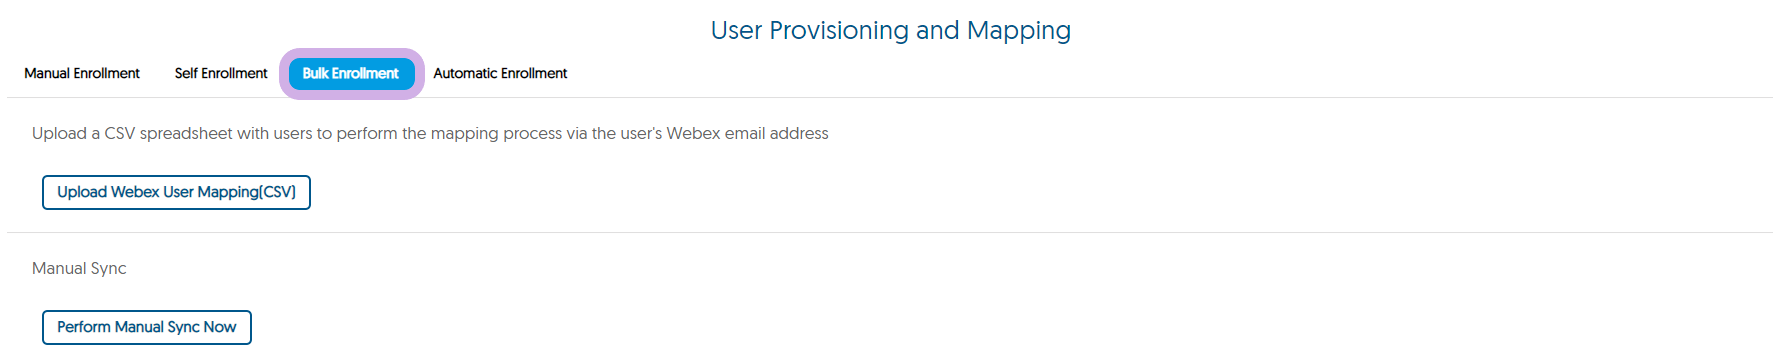 The User Provisioning and Mapping panel for Webex with Bulk Enrollment selected.